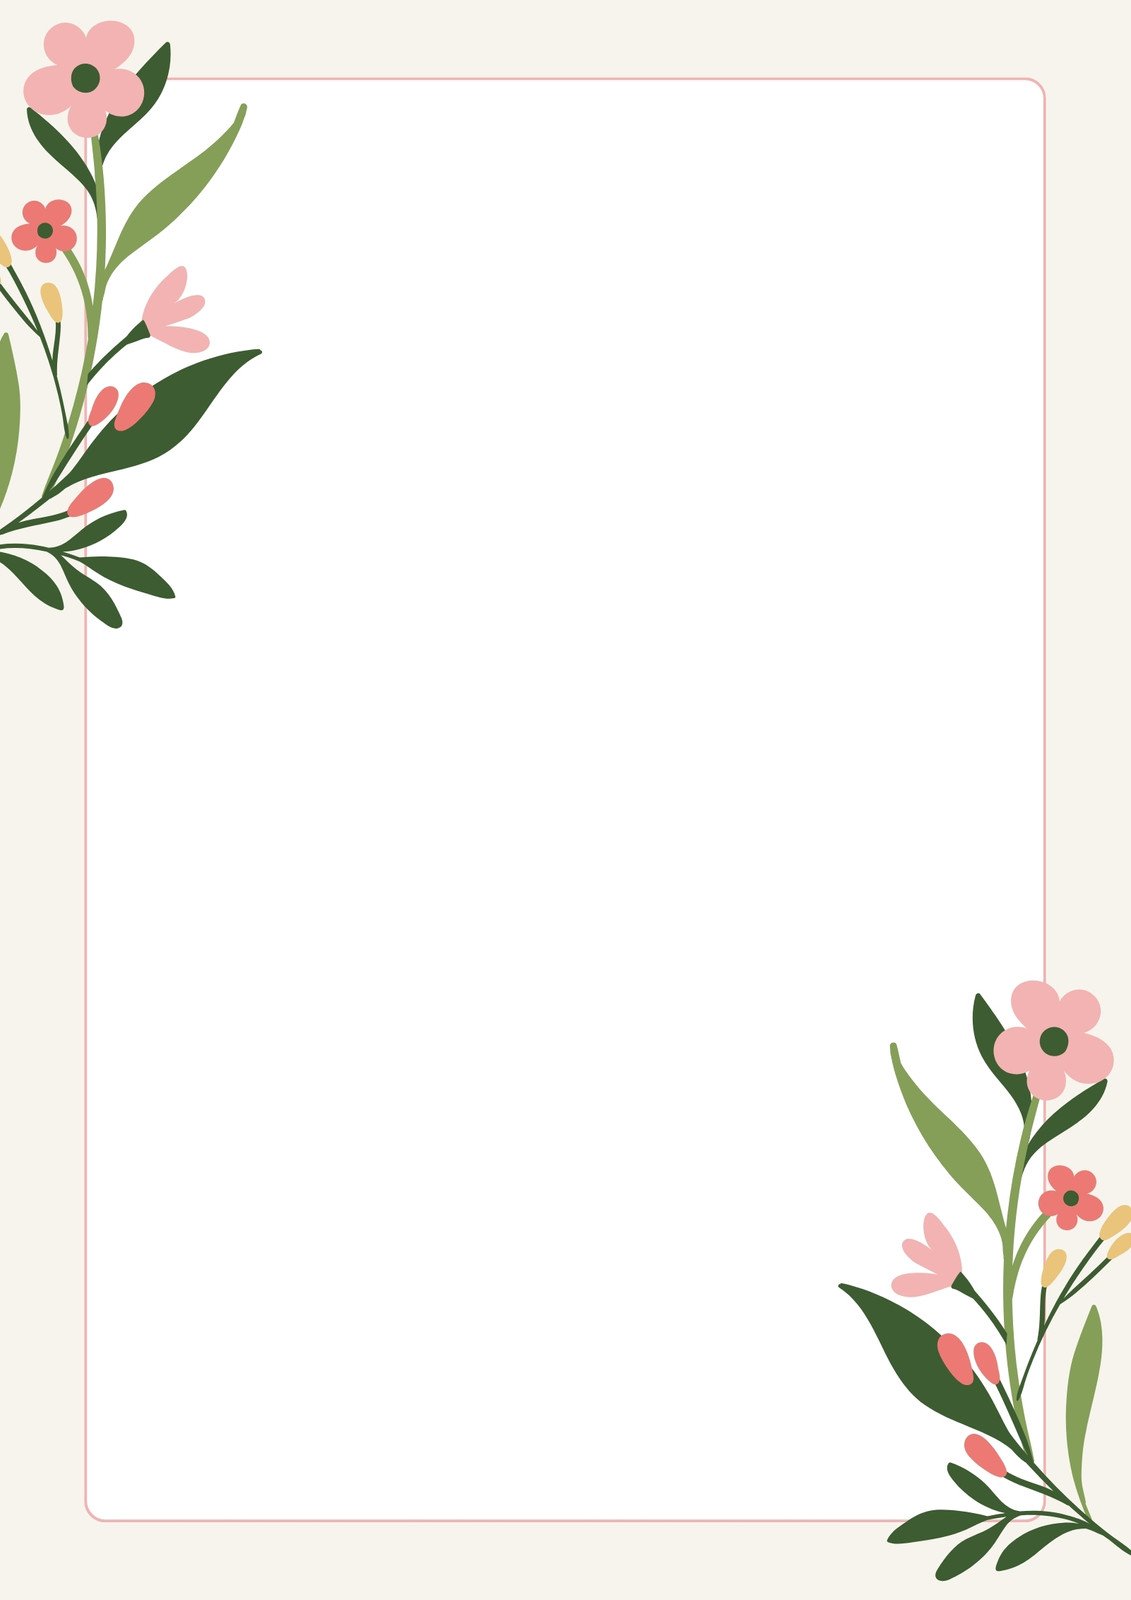 Page 4 - Free printable page border templates you can customize ...